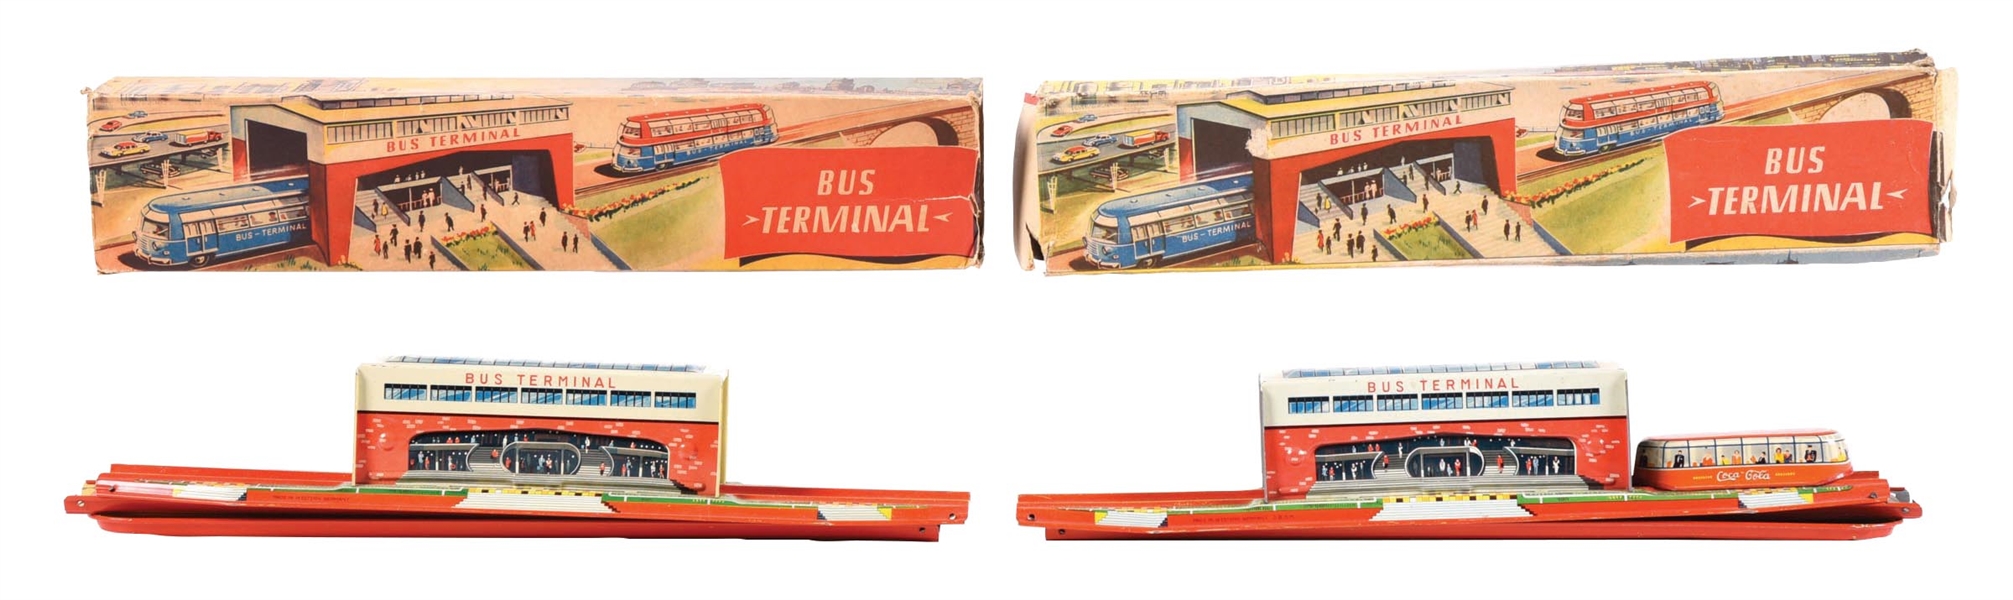 COLLECTION OF 2 BUS TERMINAL TOYS